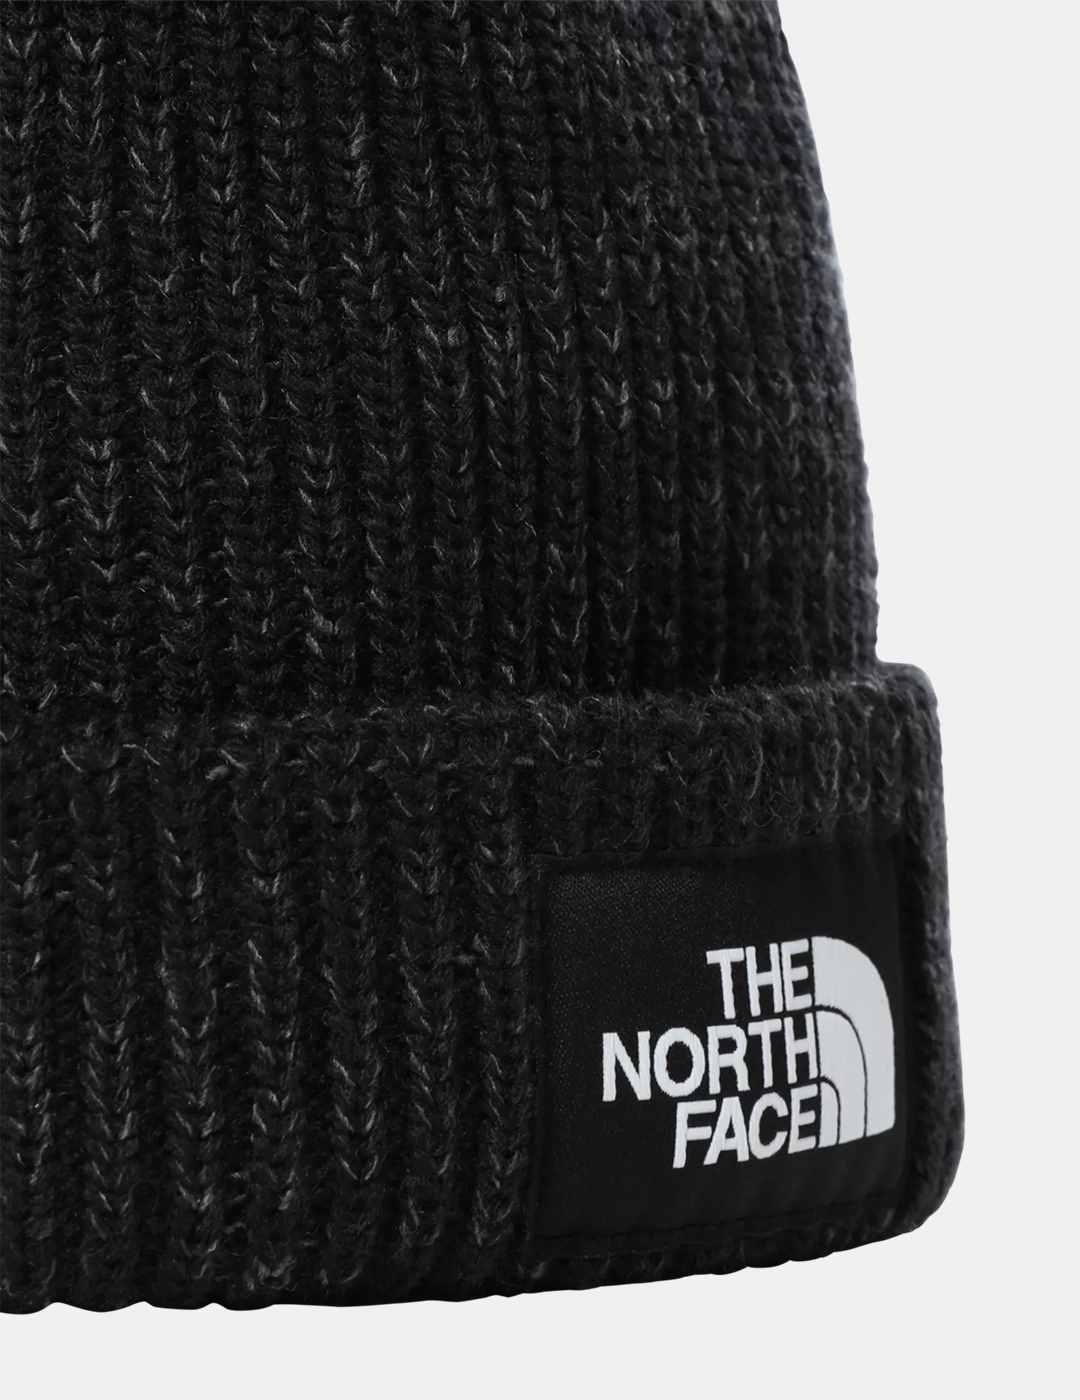 Gorro The North Face Salty Lined Negro